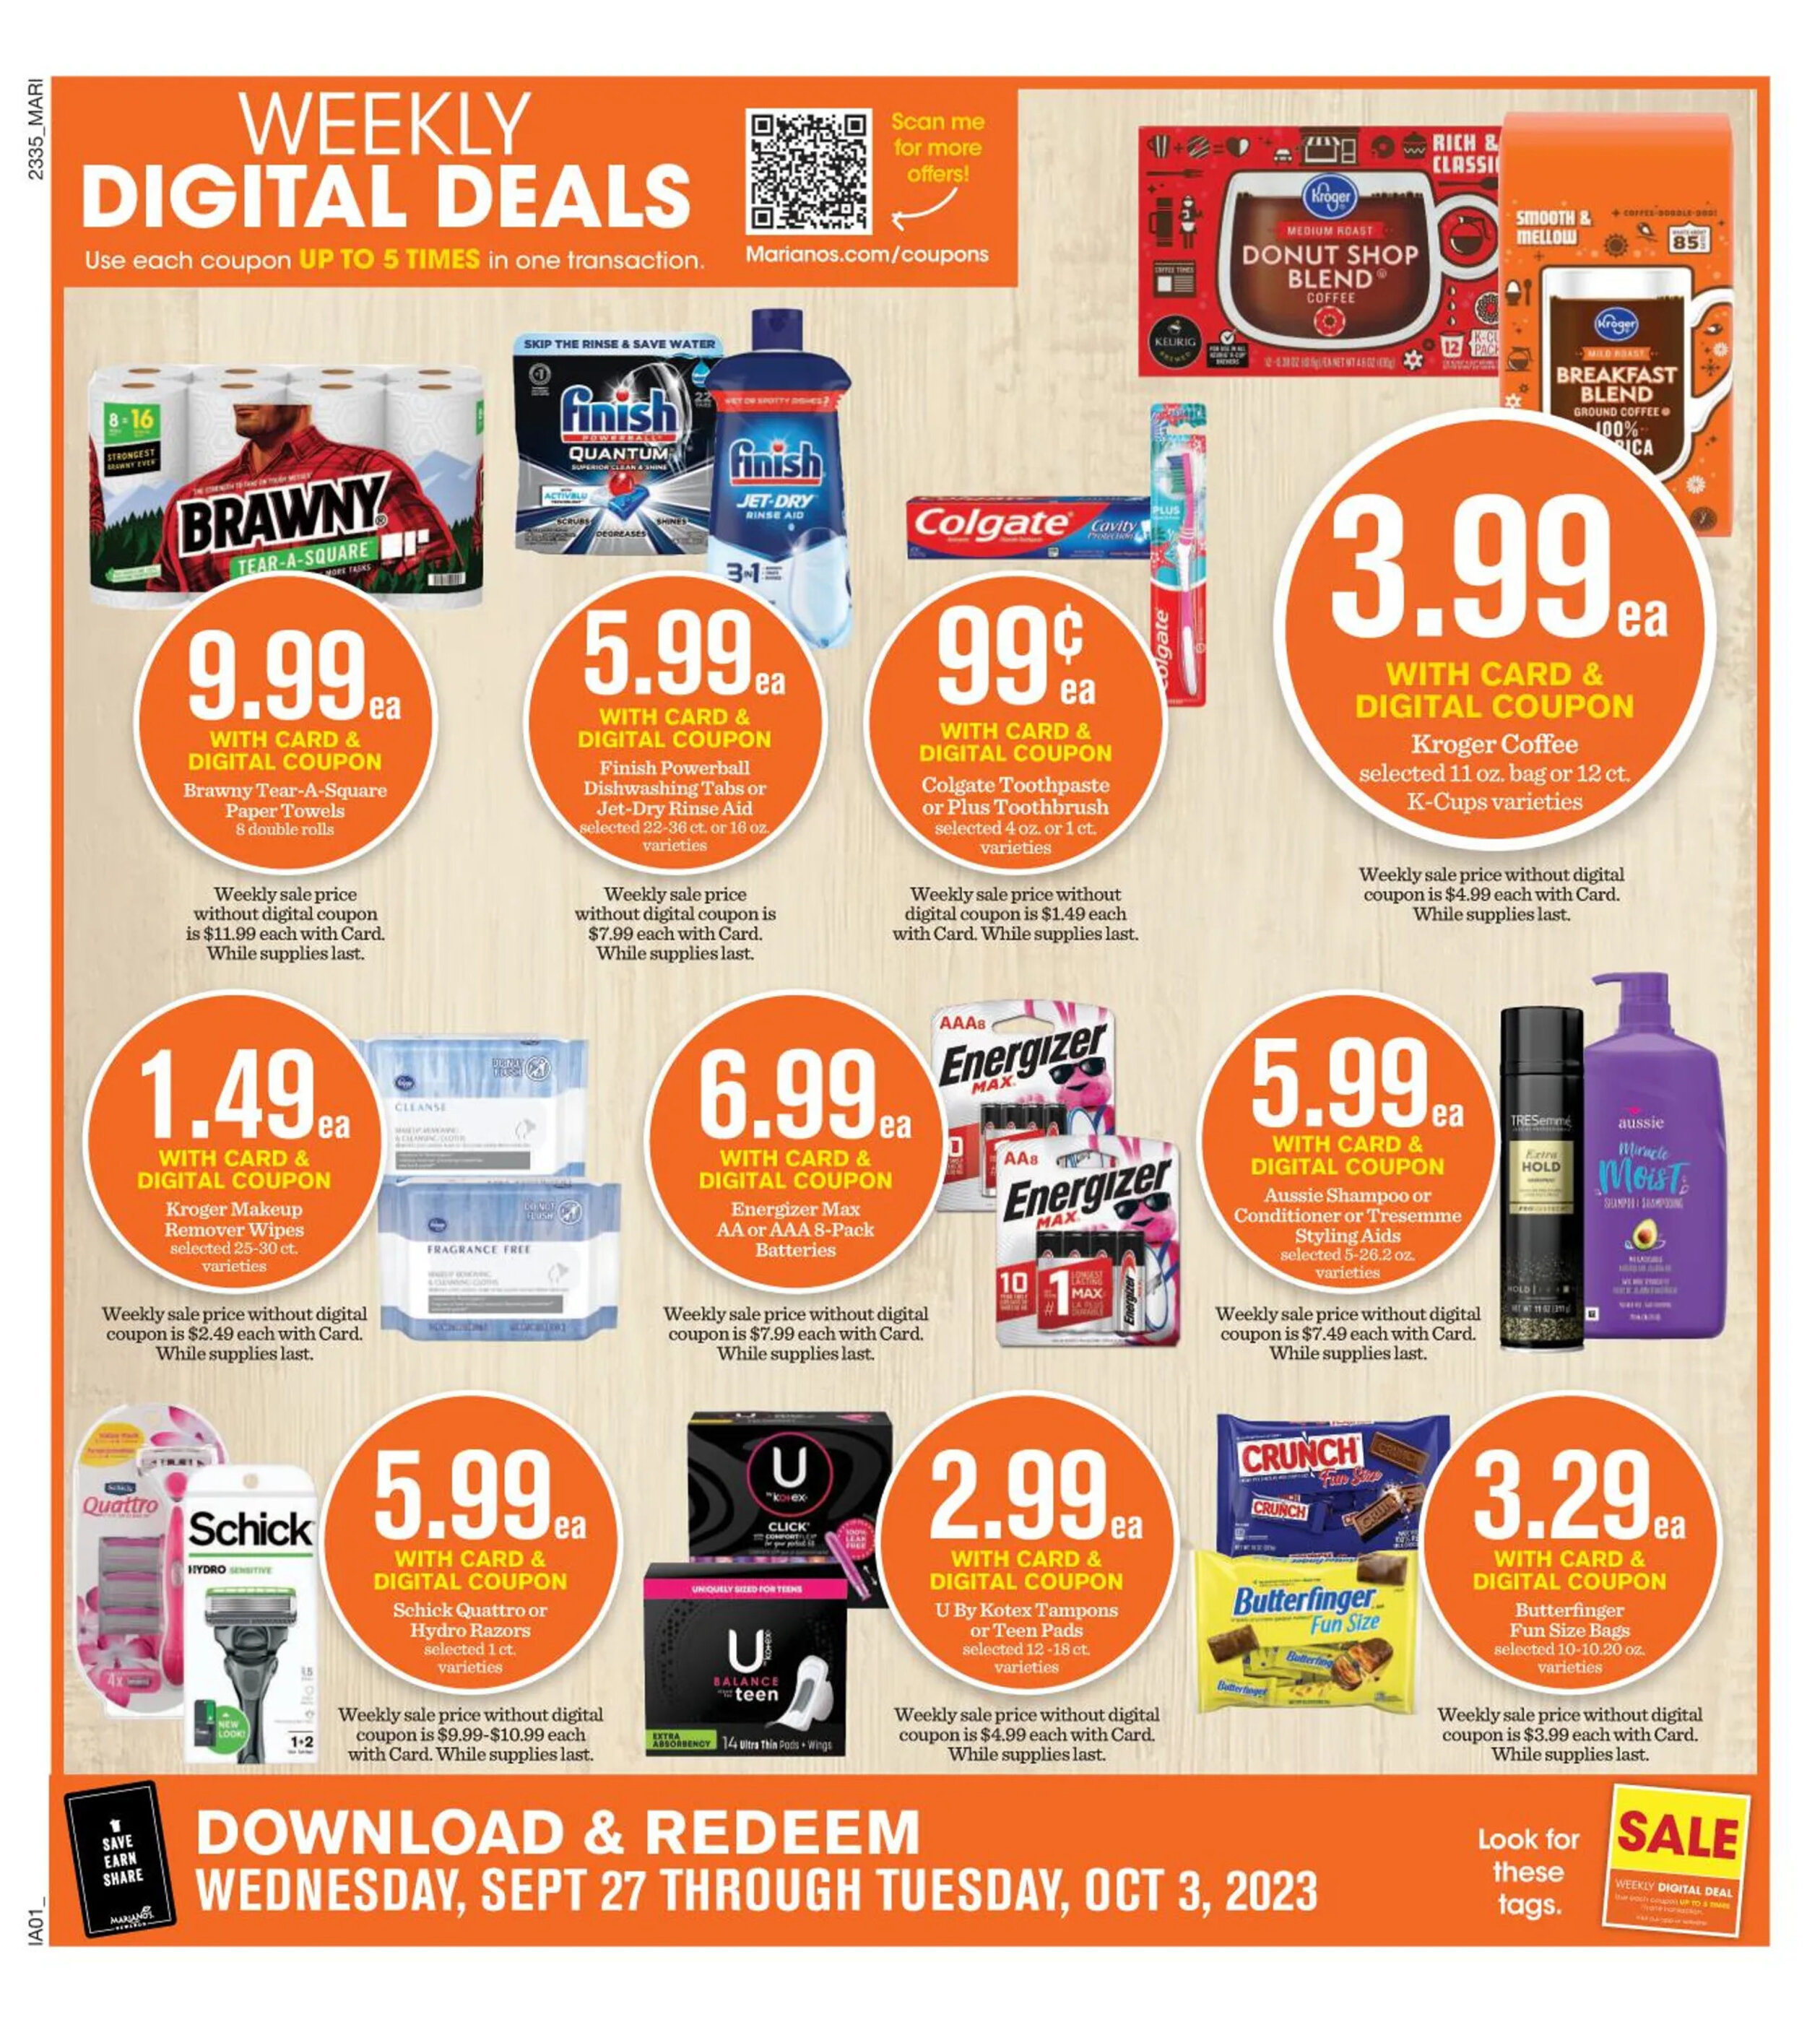 Marianos Weekly Ad Preview: (October 4 - October 10 2023)